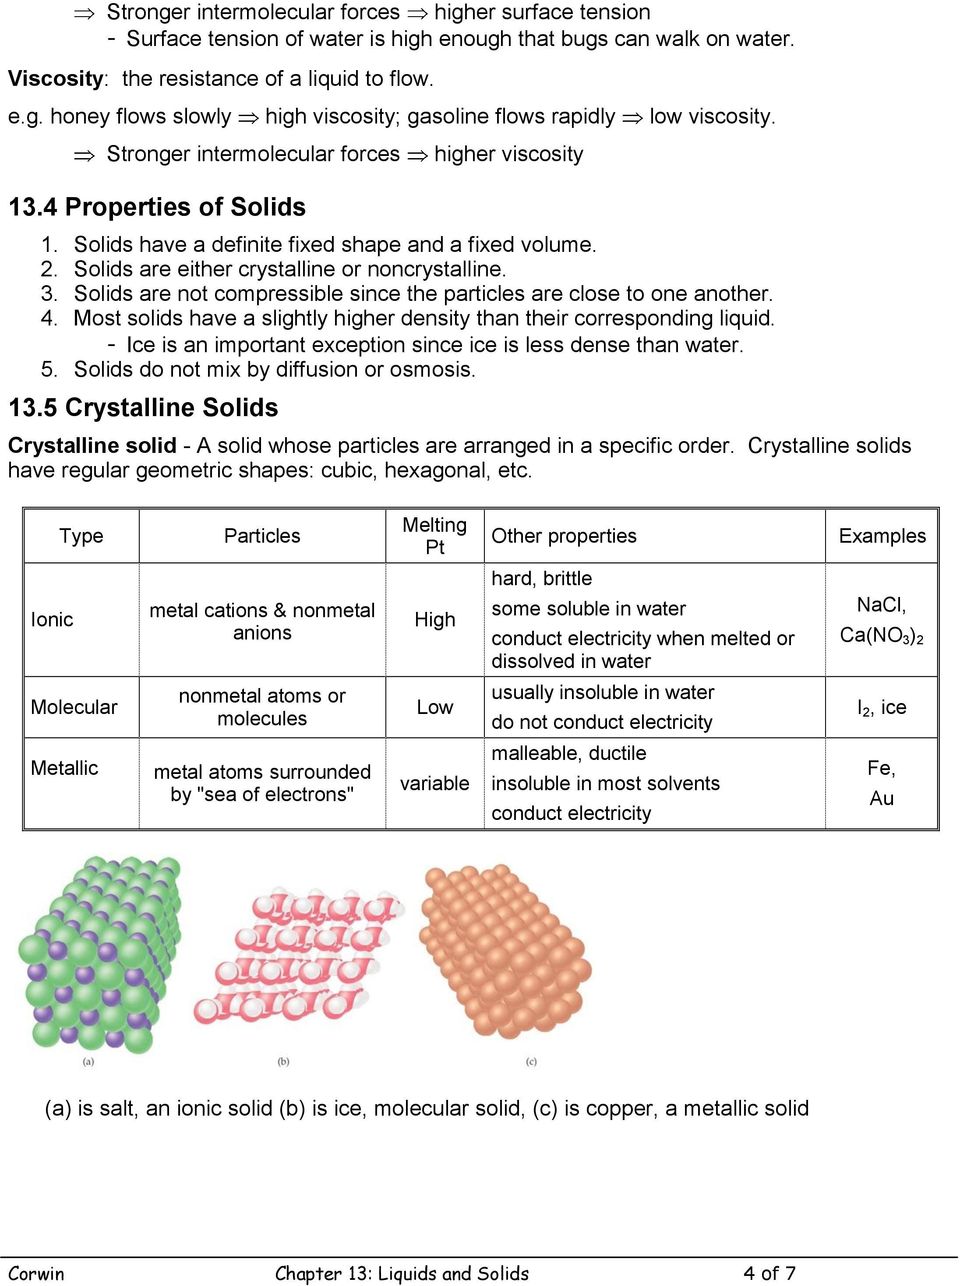 Solids are not compressible since the particles are close to one another. 4. Most solids have a slightly higher density than their corresponding liquid.